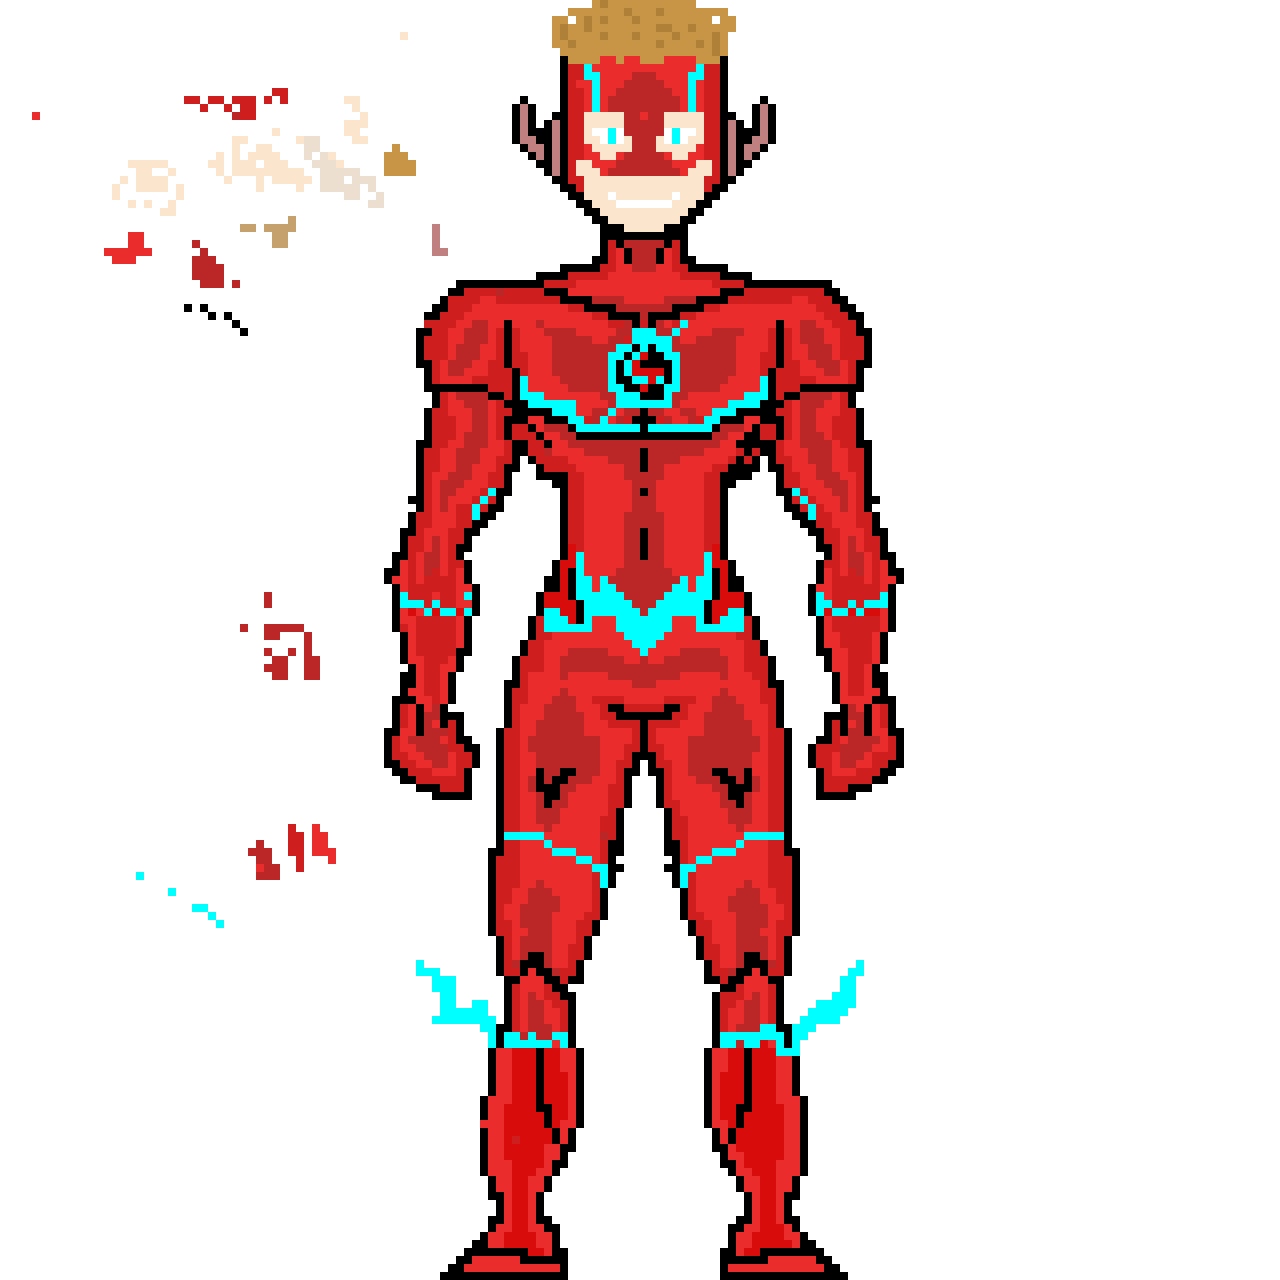 Wally west ( sorry about the colors on the left.)